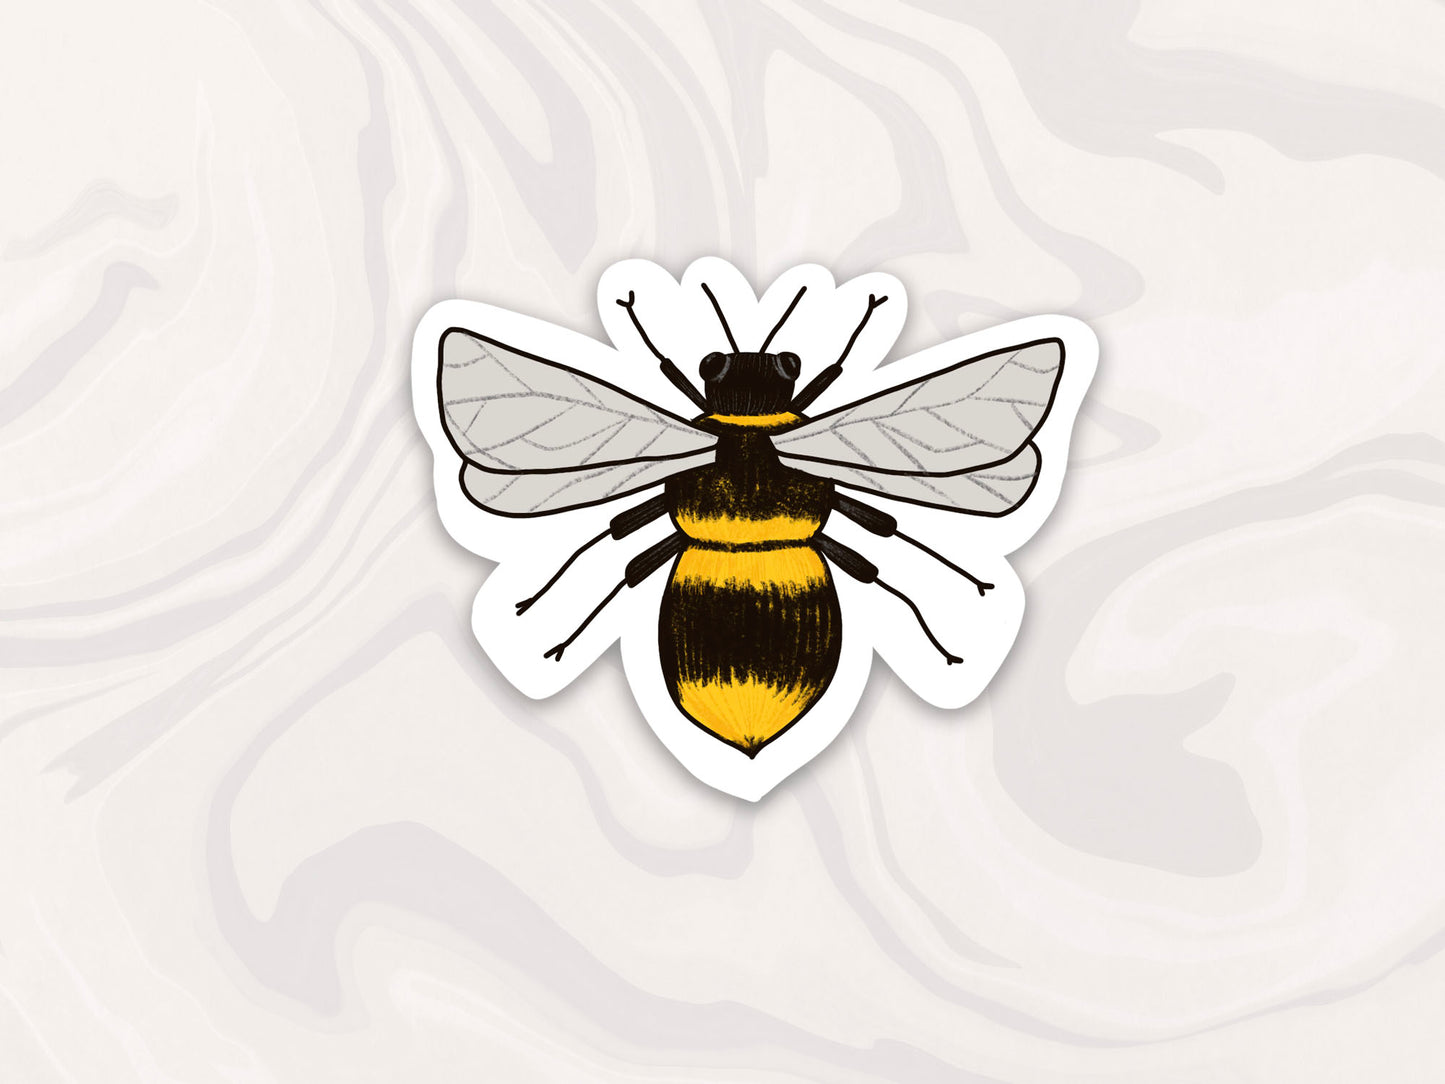 bumble bee sticker set, set of 4 bee themed stickers with positive and encouraging messages, bee sticker